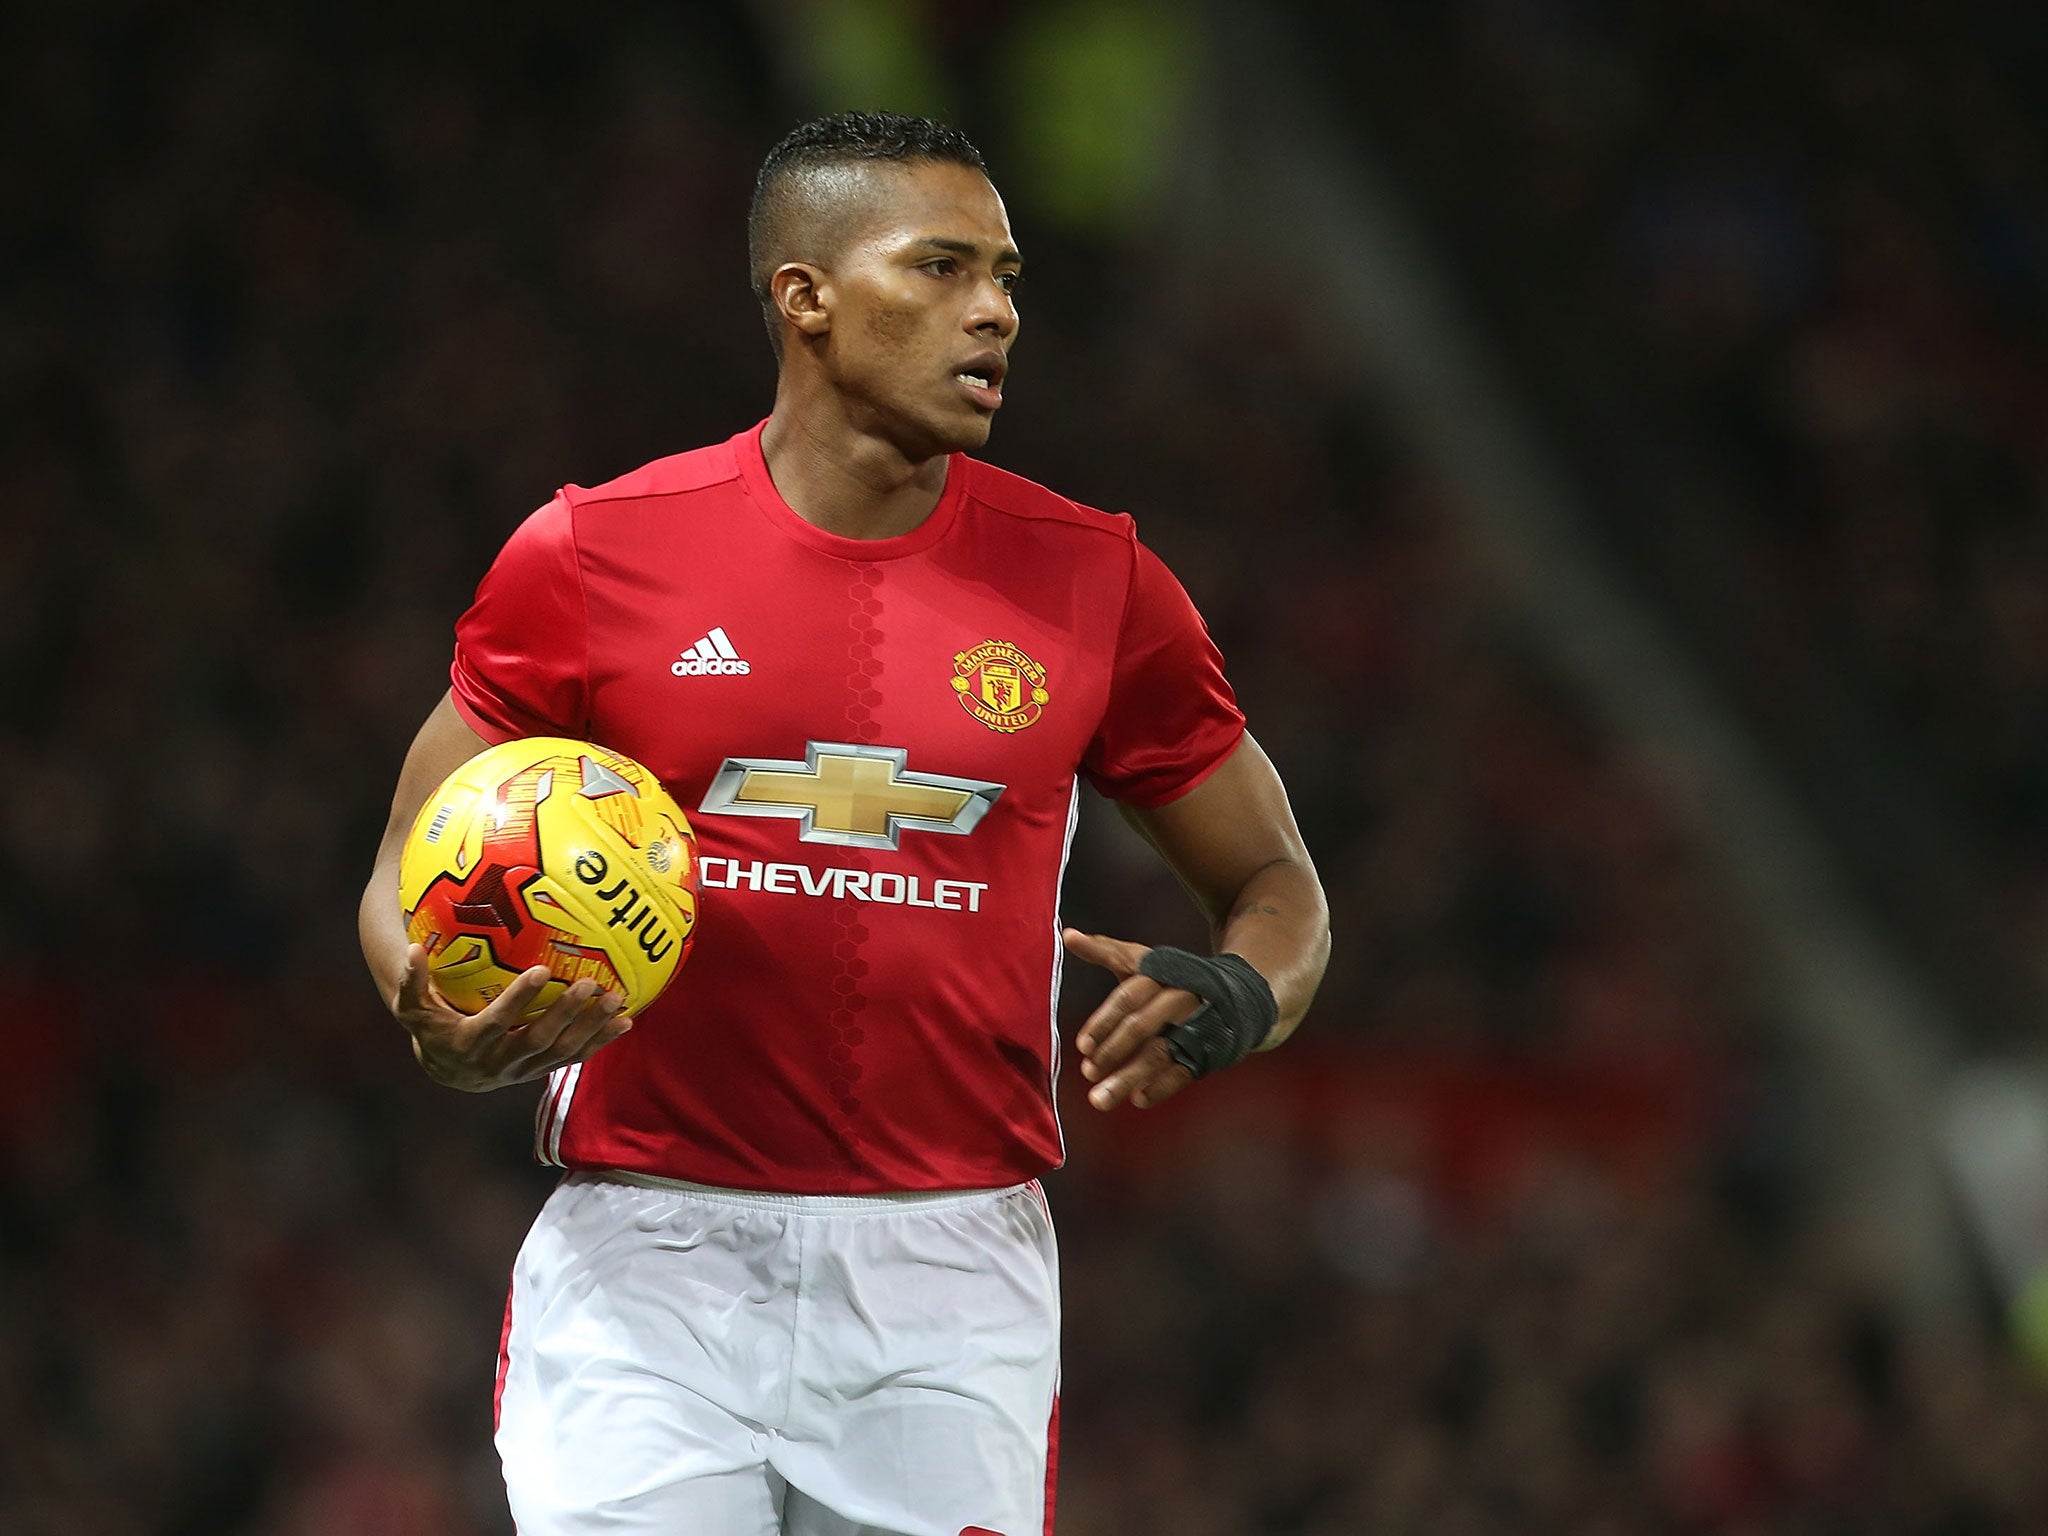 Antonio Valencia has extended his Manchester United contract by an additional year until 2018